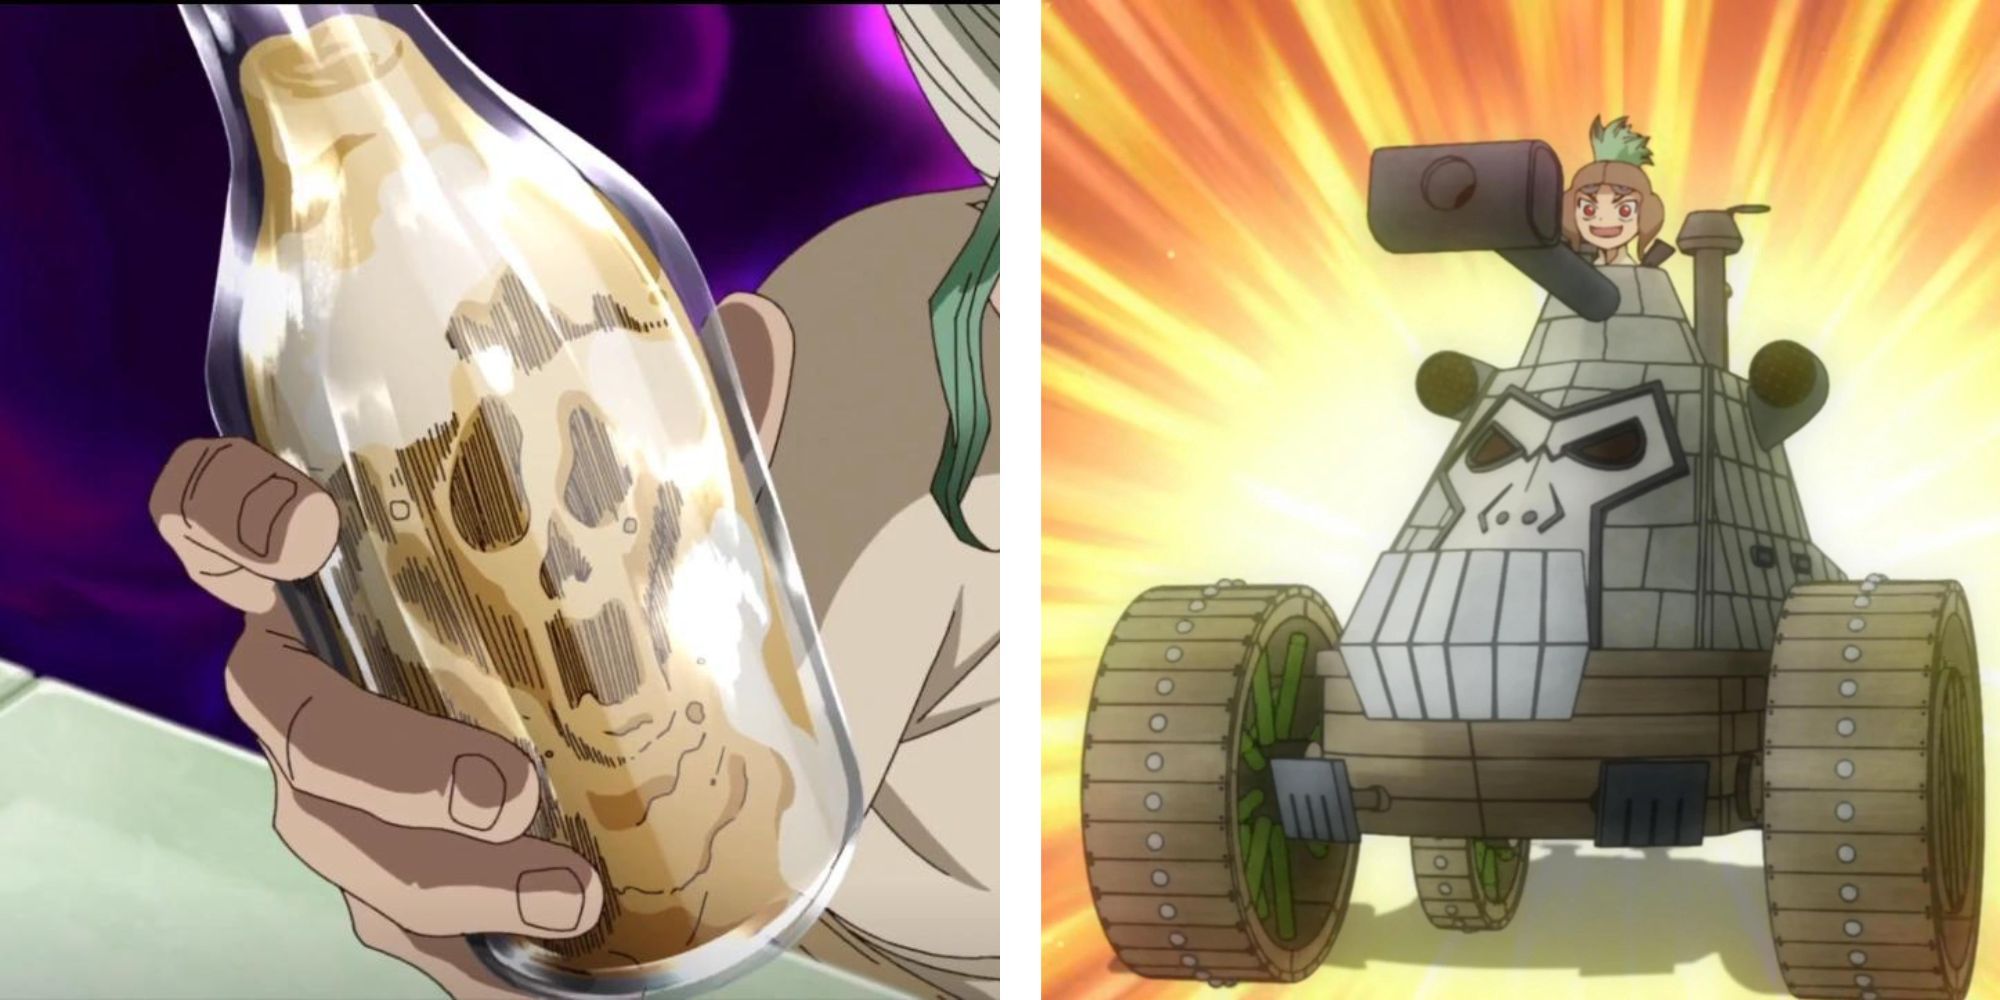 Split Image of Power-up science drink and Tank